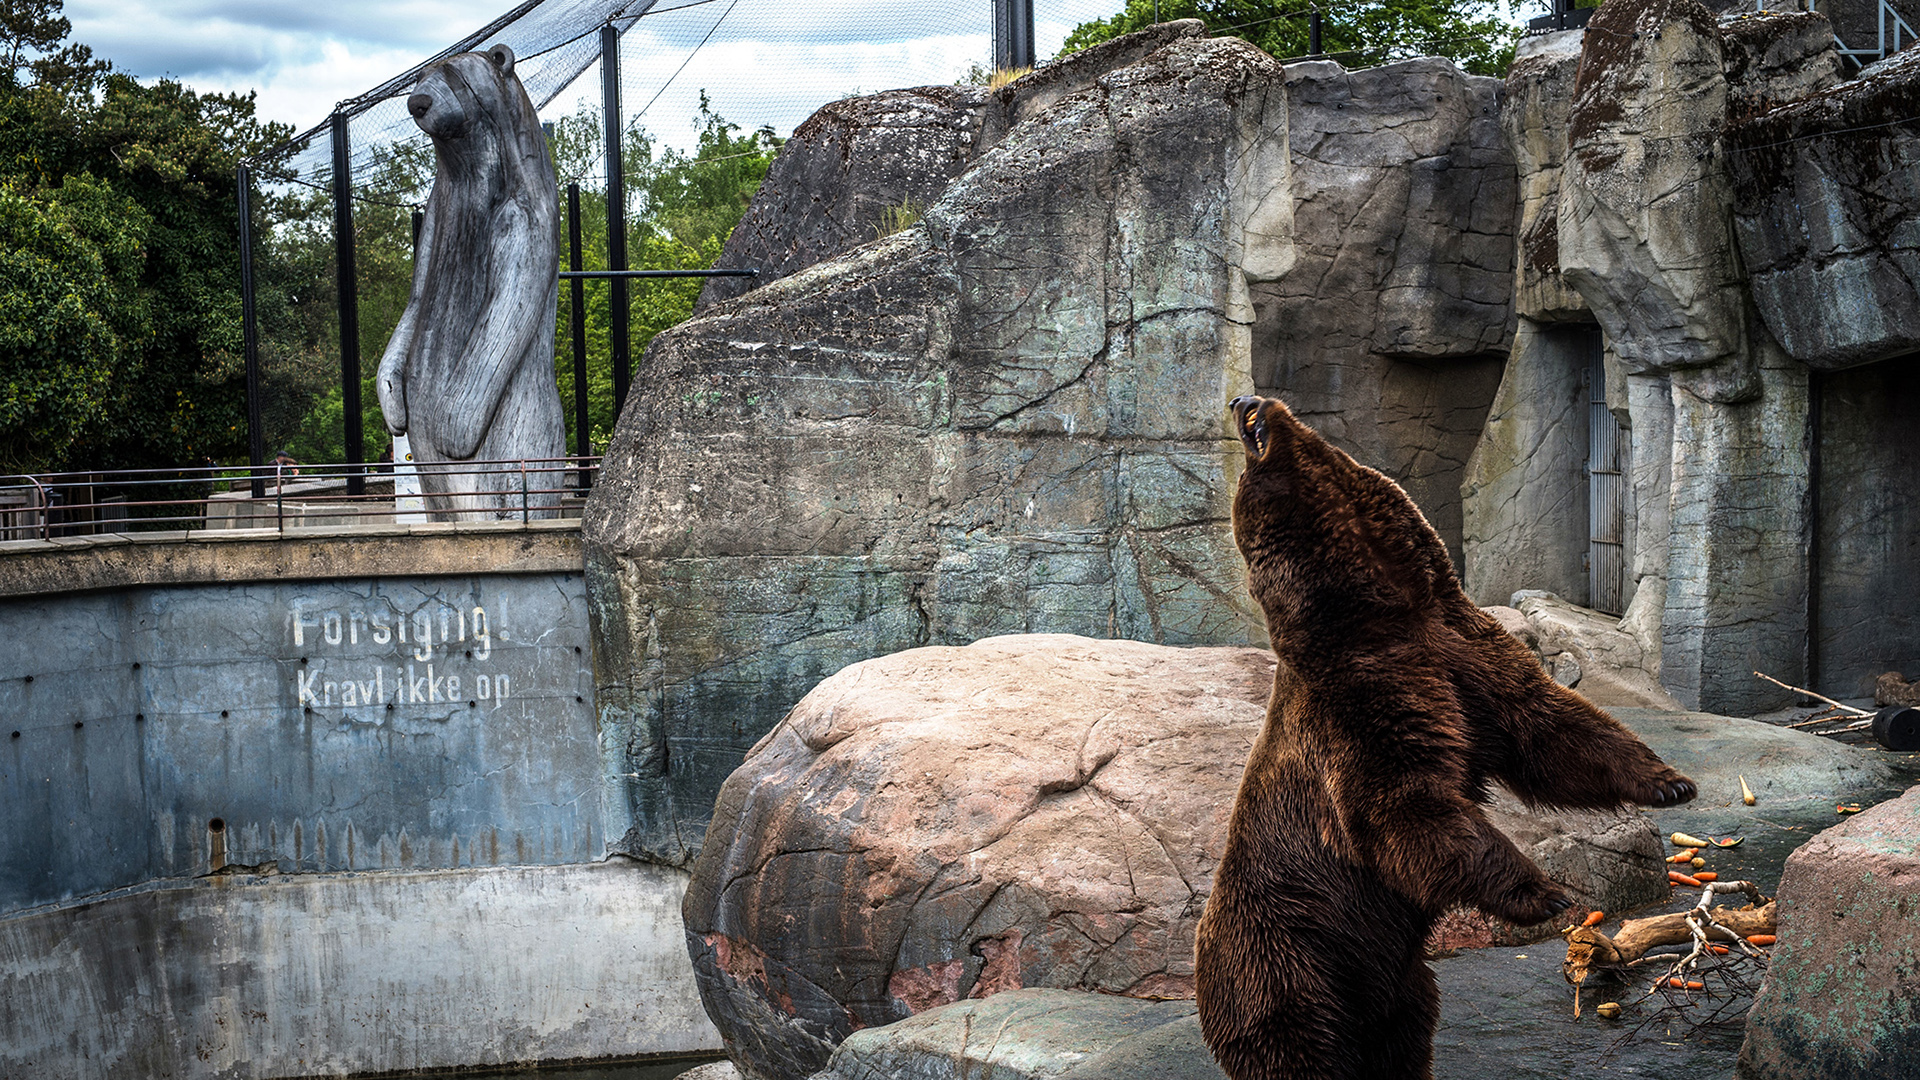 A brown bear in a zoo enclosure stood on hind legs twisting its neck